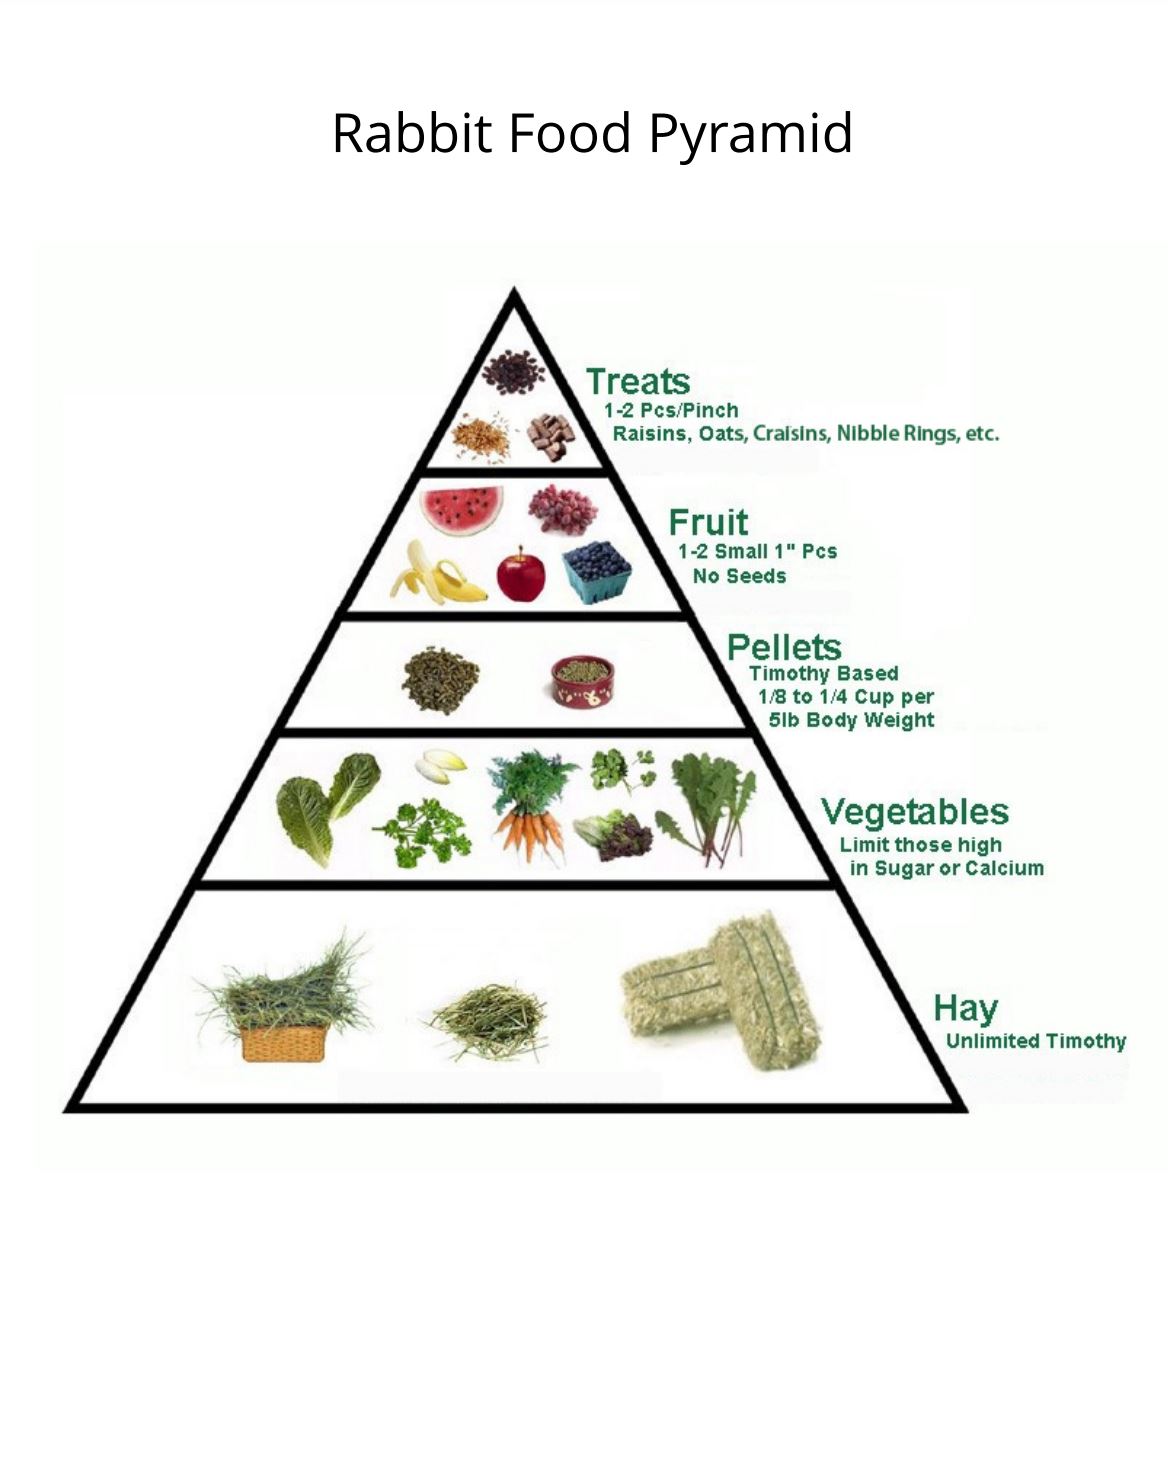 What rabbits eat diet pyramid